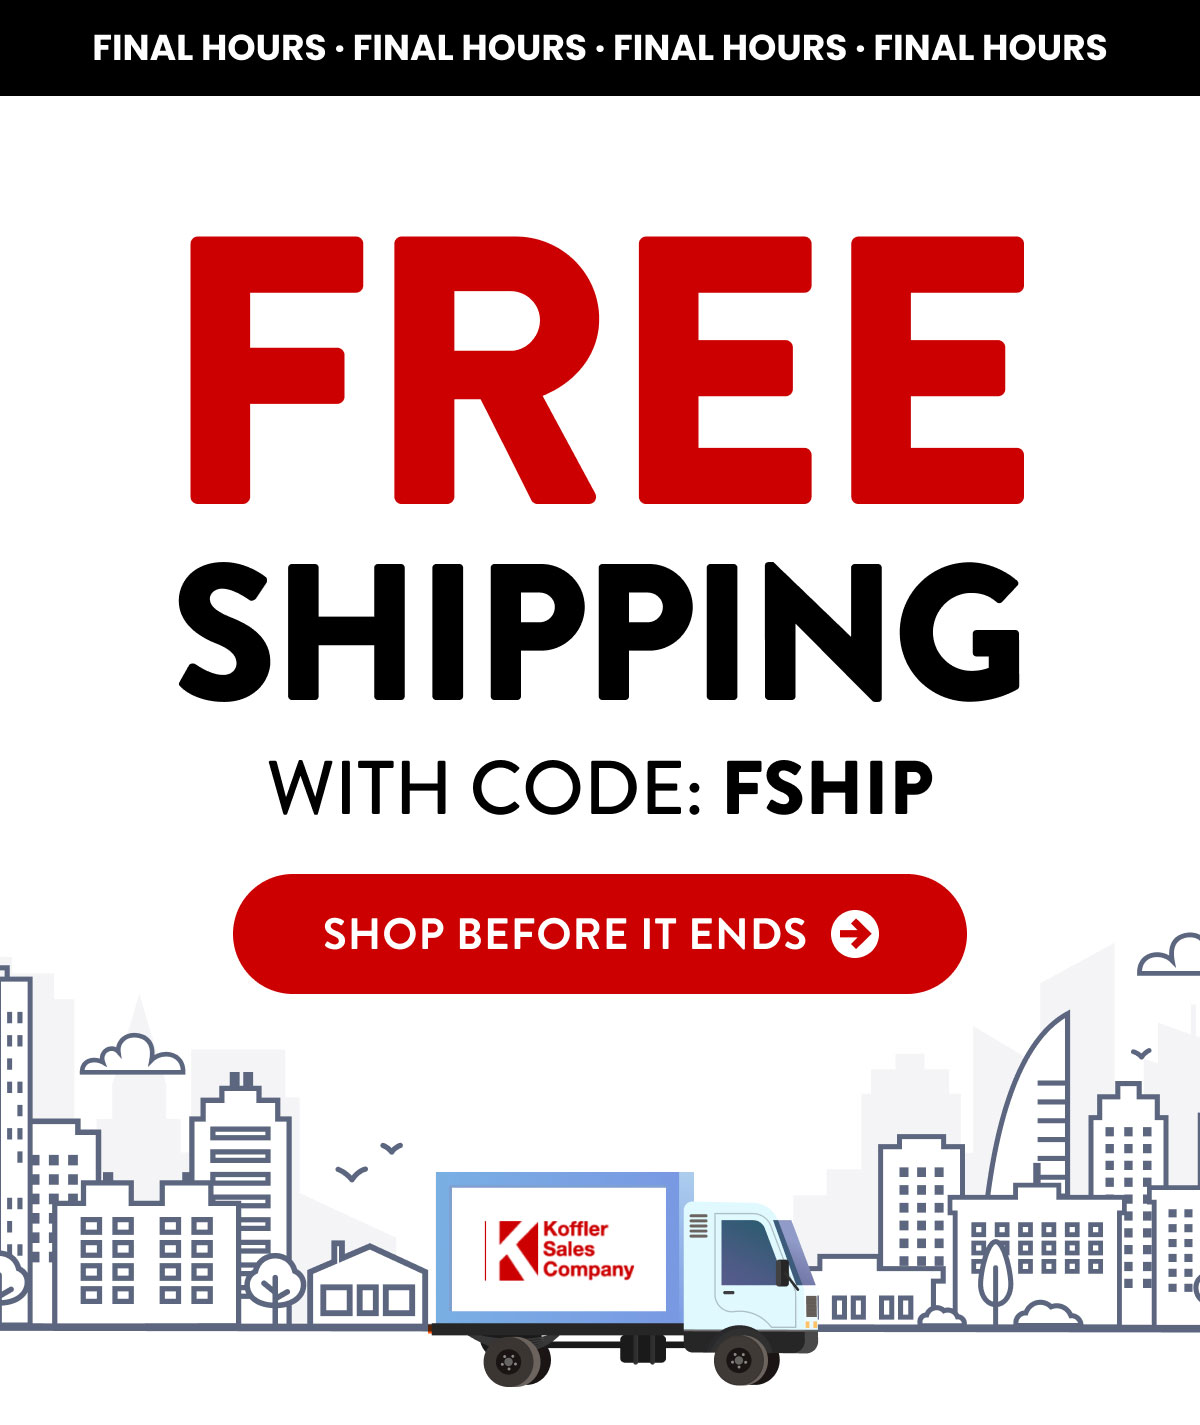 Final Hours Free Shipping - Shop Before It Ends